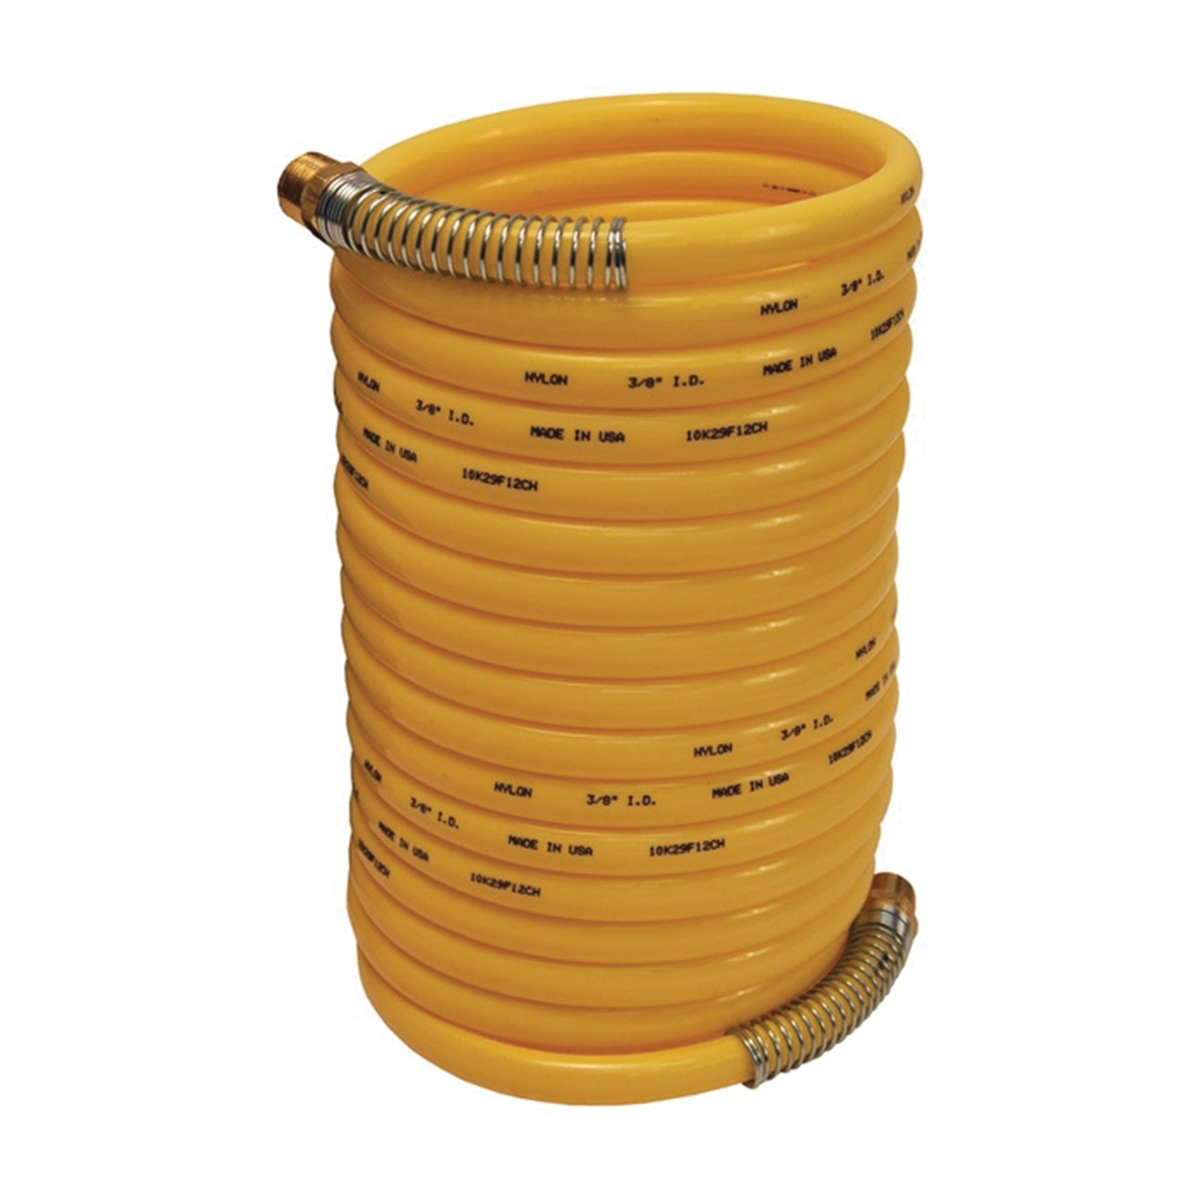 Approved Supplier U204910 Self-Storing Air Hose, 1/4 in ID, 25 ft L Hose, Nylon Hose, Yellow Hose